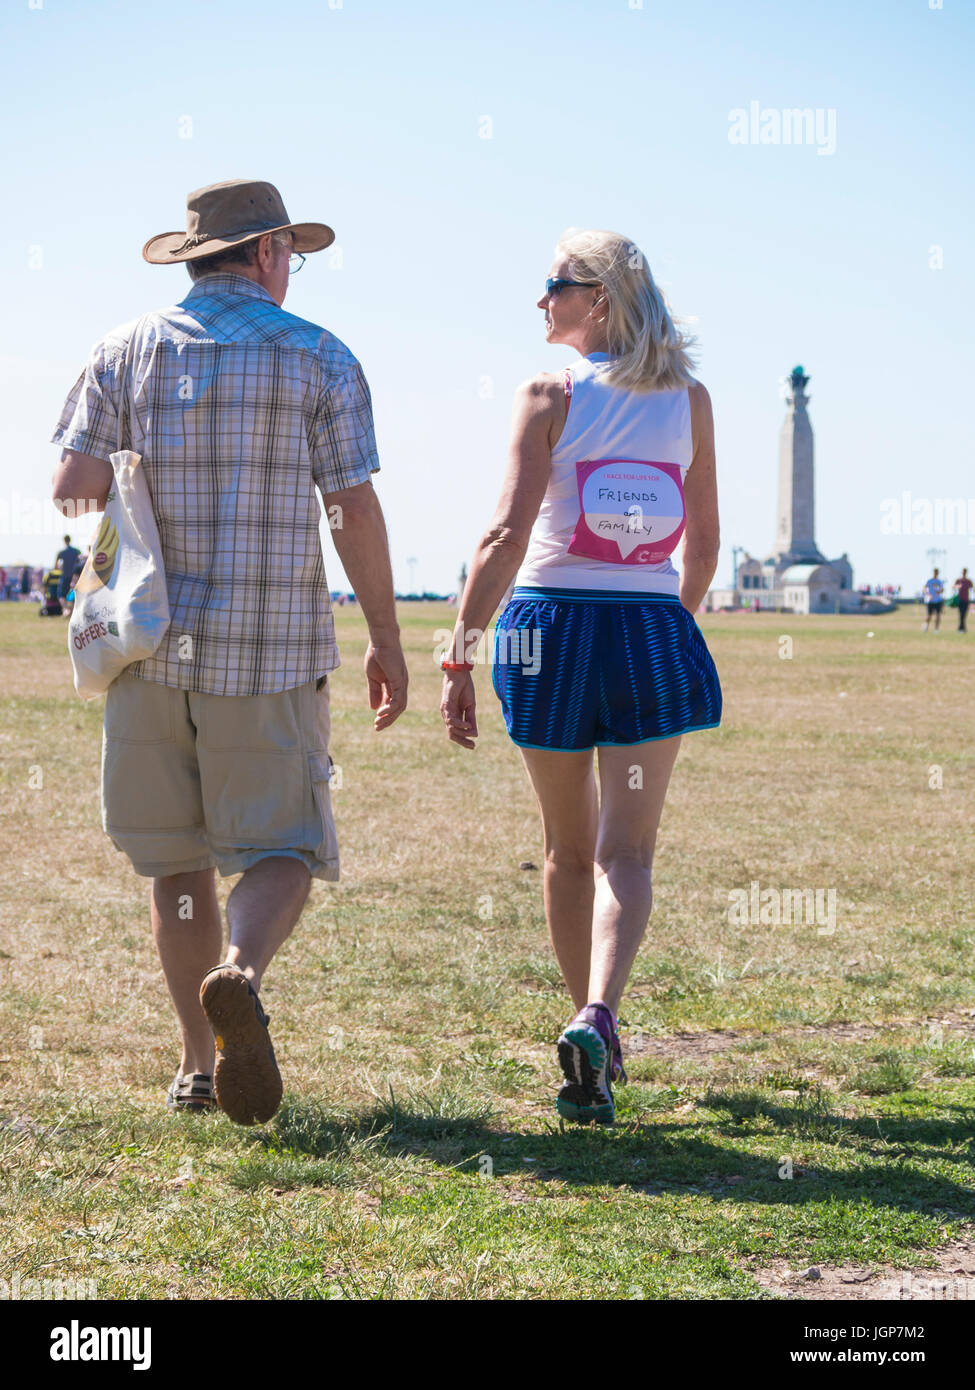 A man and woman walking across a field with the lady in running clothing and a 'Race for life' T-shirt Stock Photo